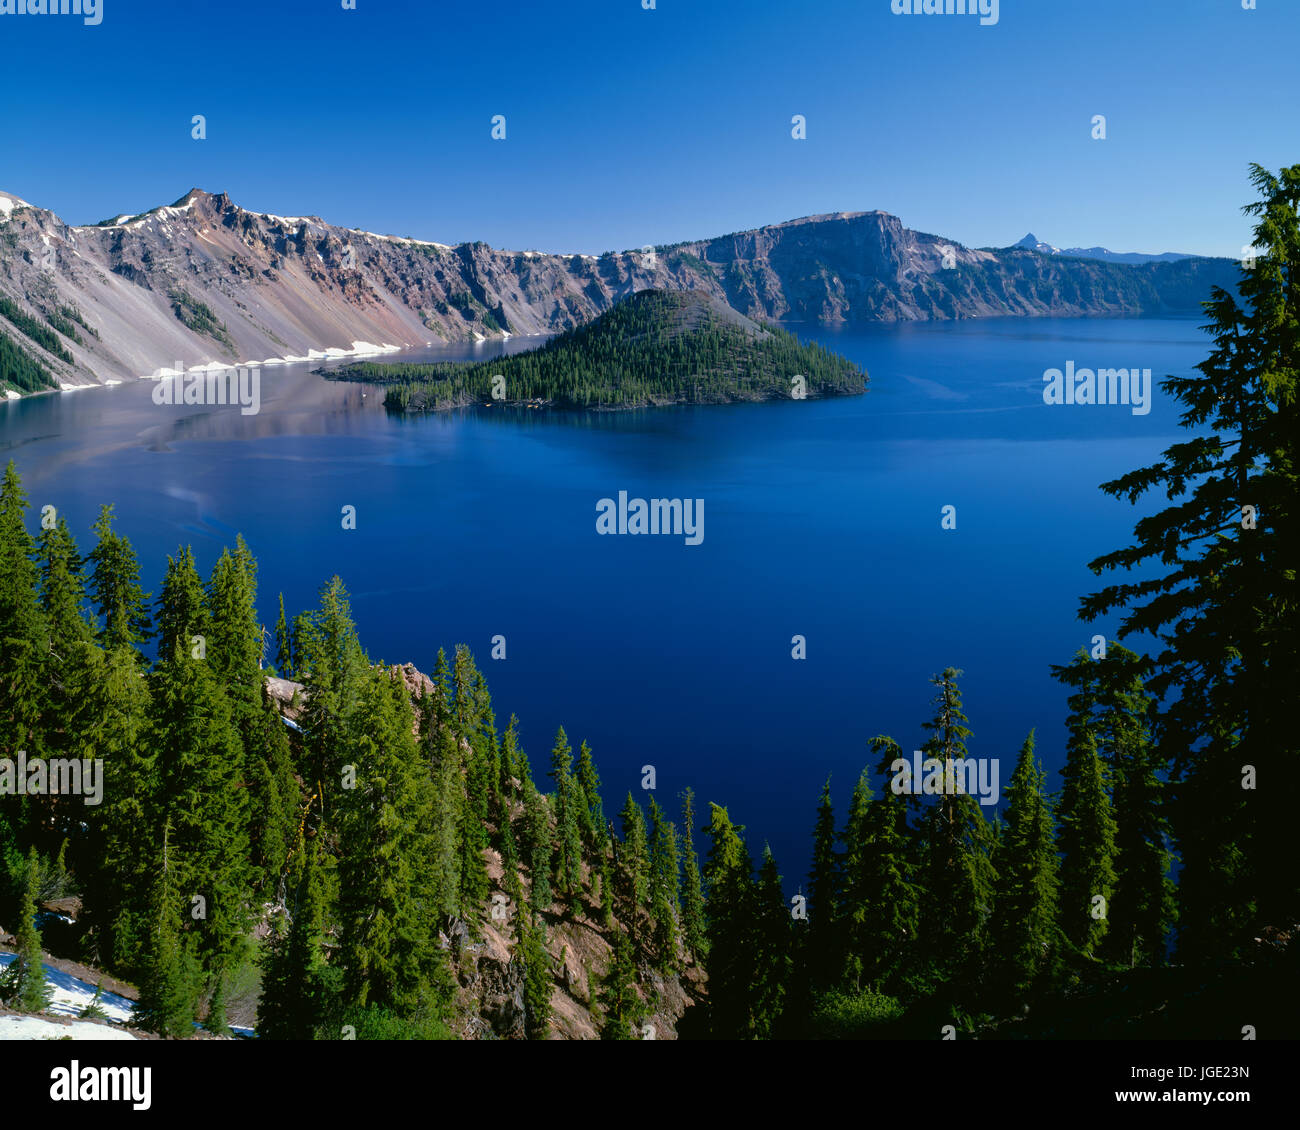 USA, Oregon, Crater Lake National Park, Wizard Island and Crater Lake with a grove of mountain hemlock on the south rim descending towards the lake. Stock Photo